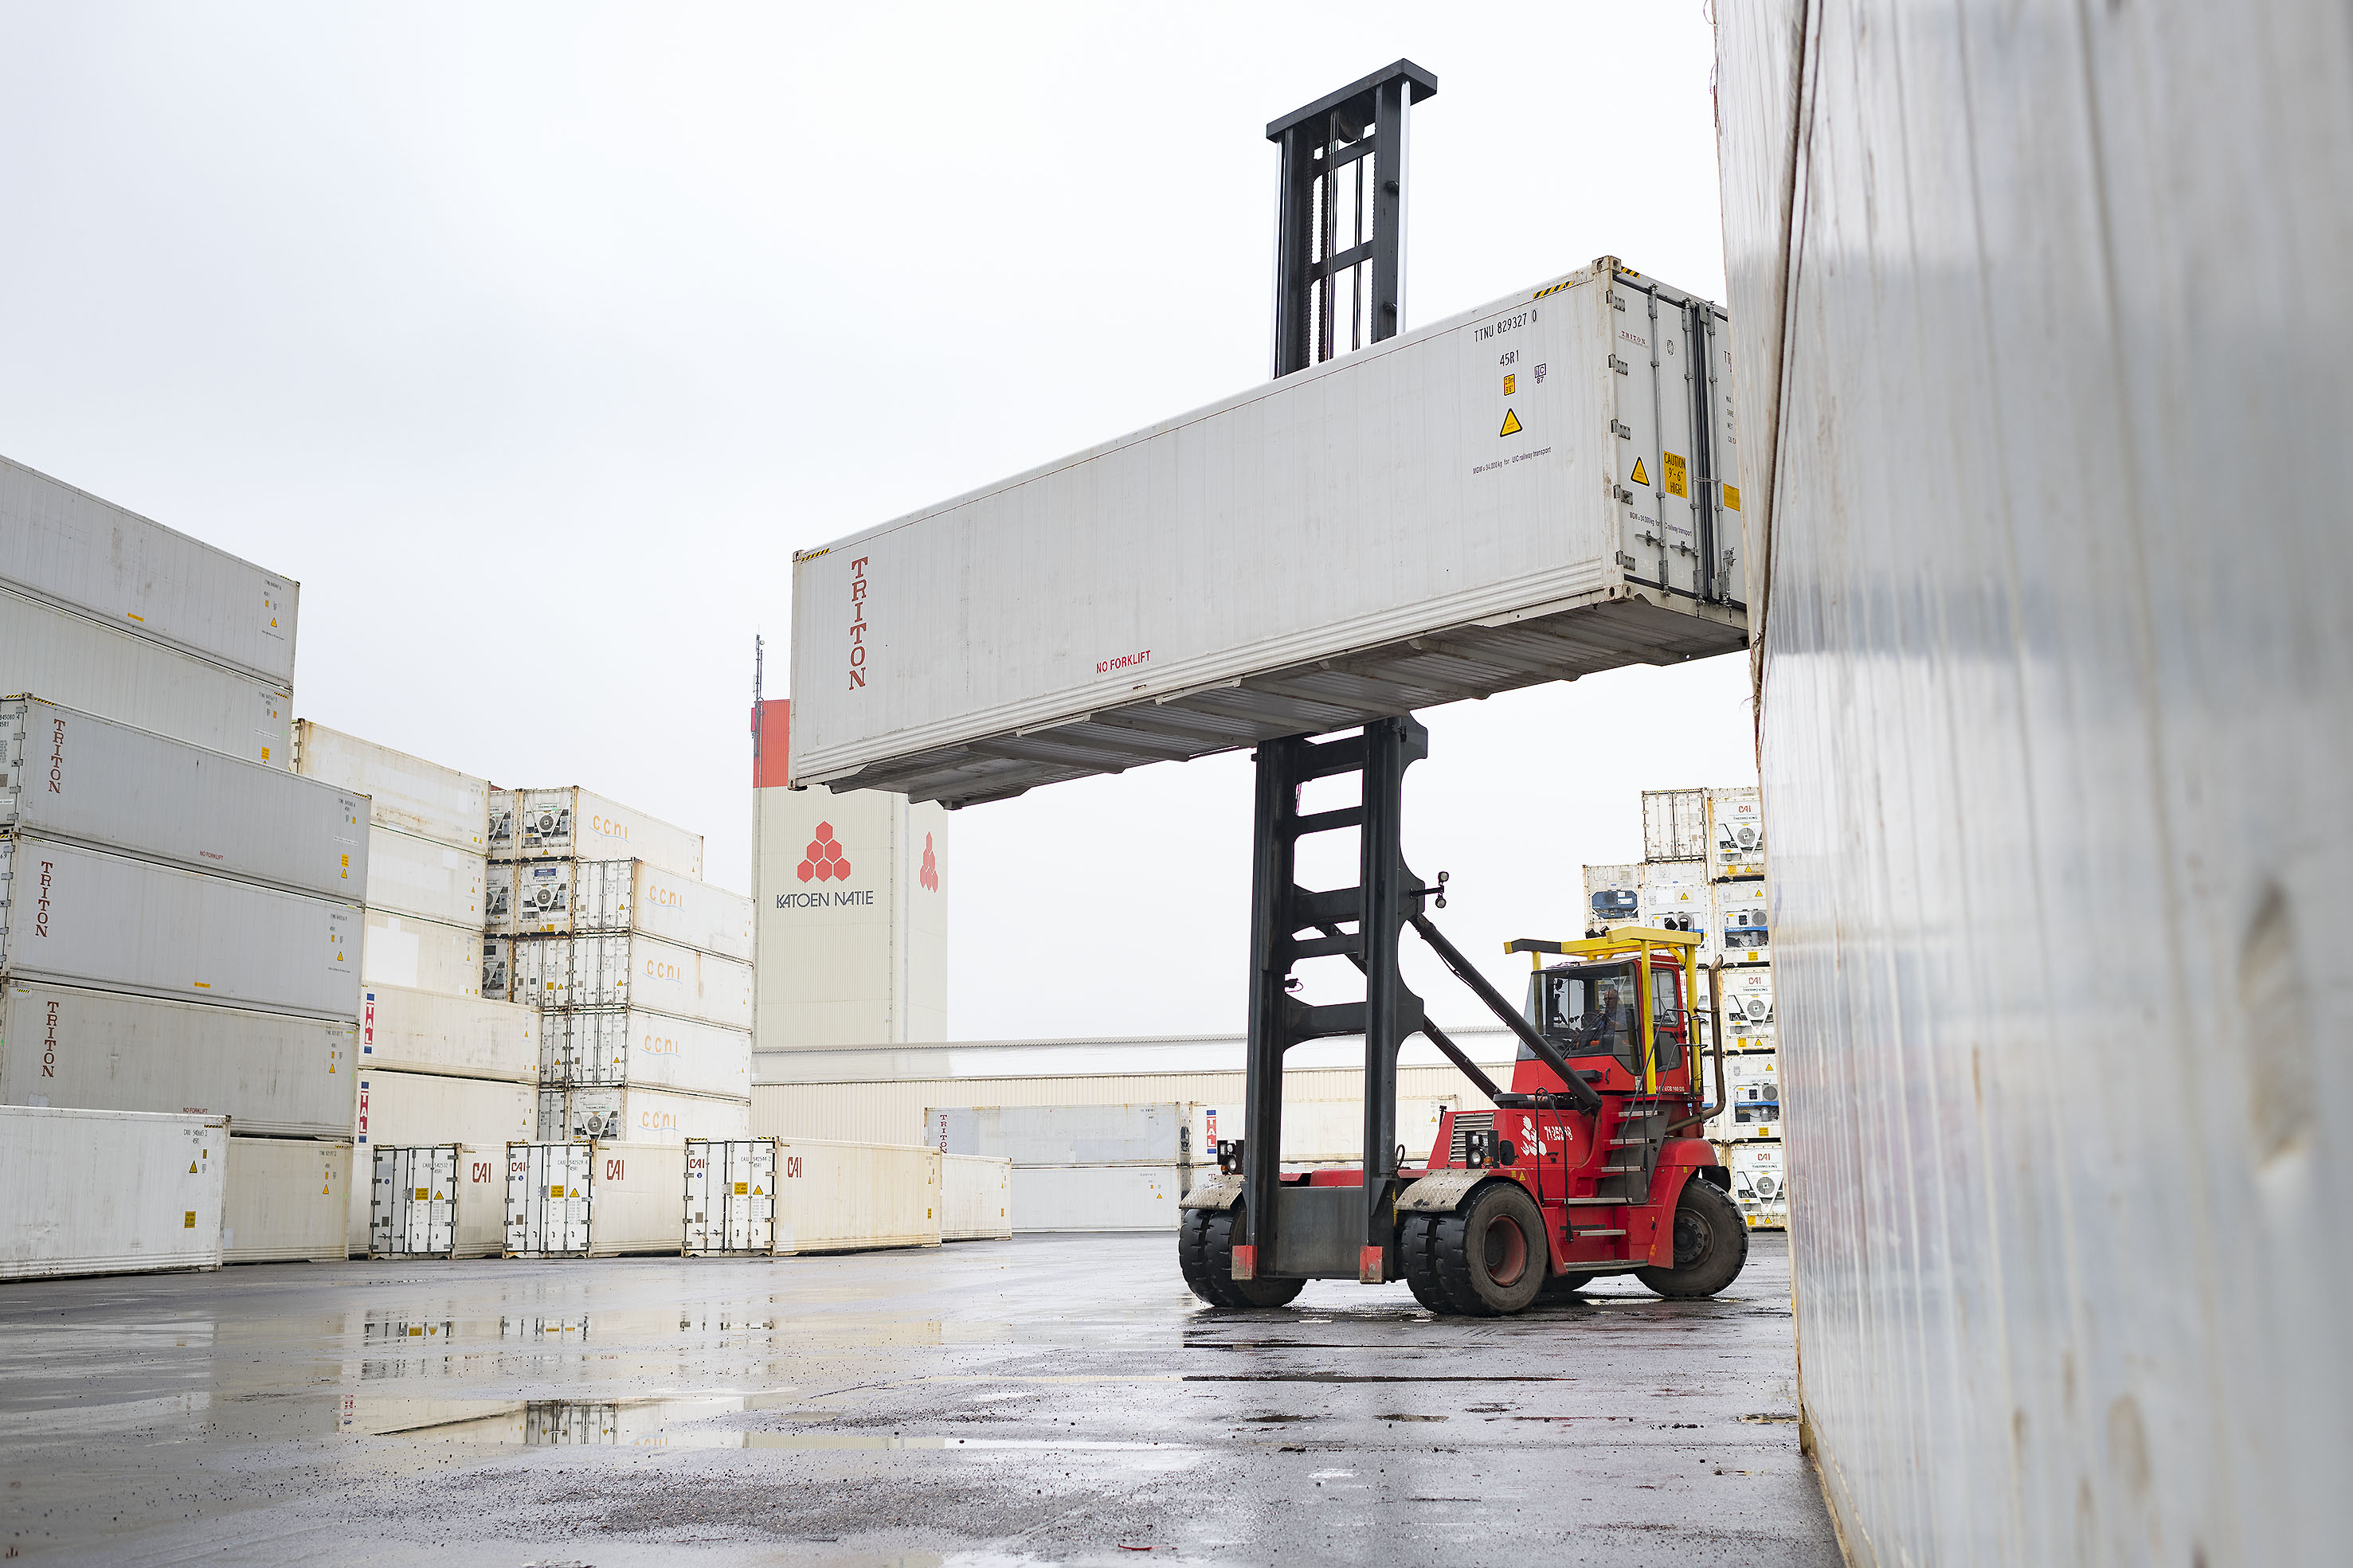 Teveco offers containers services in the port of Antwerp